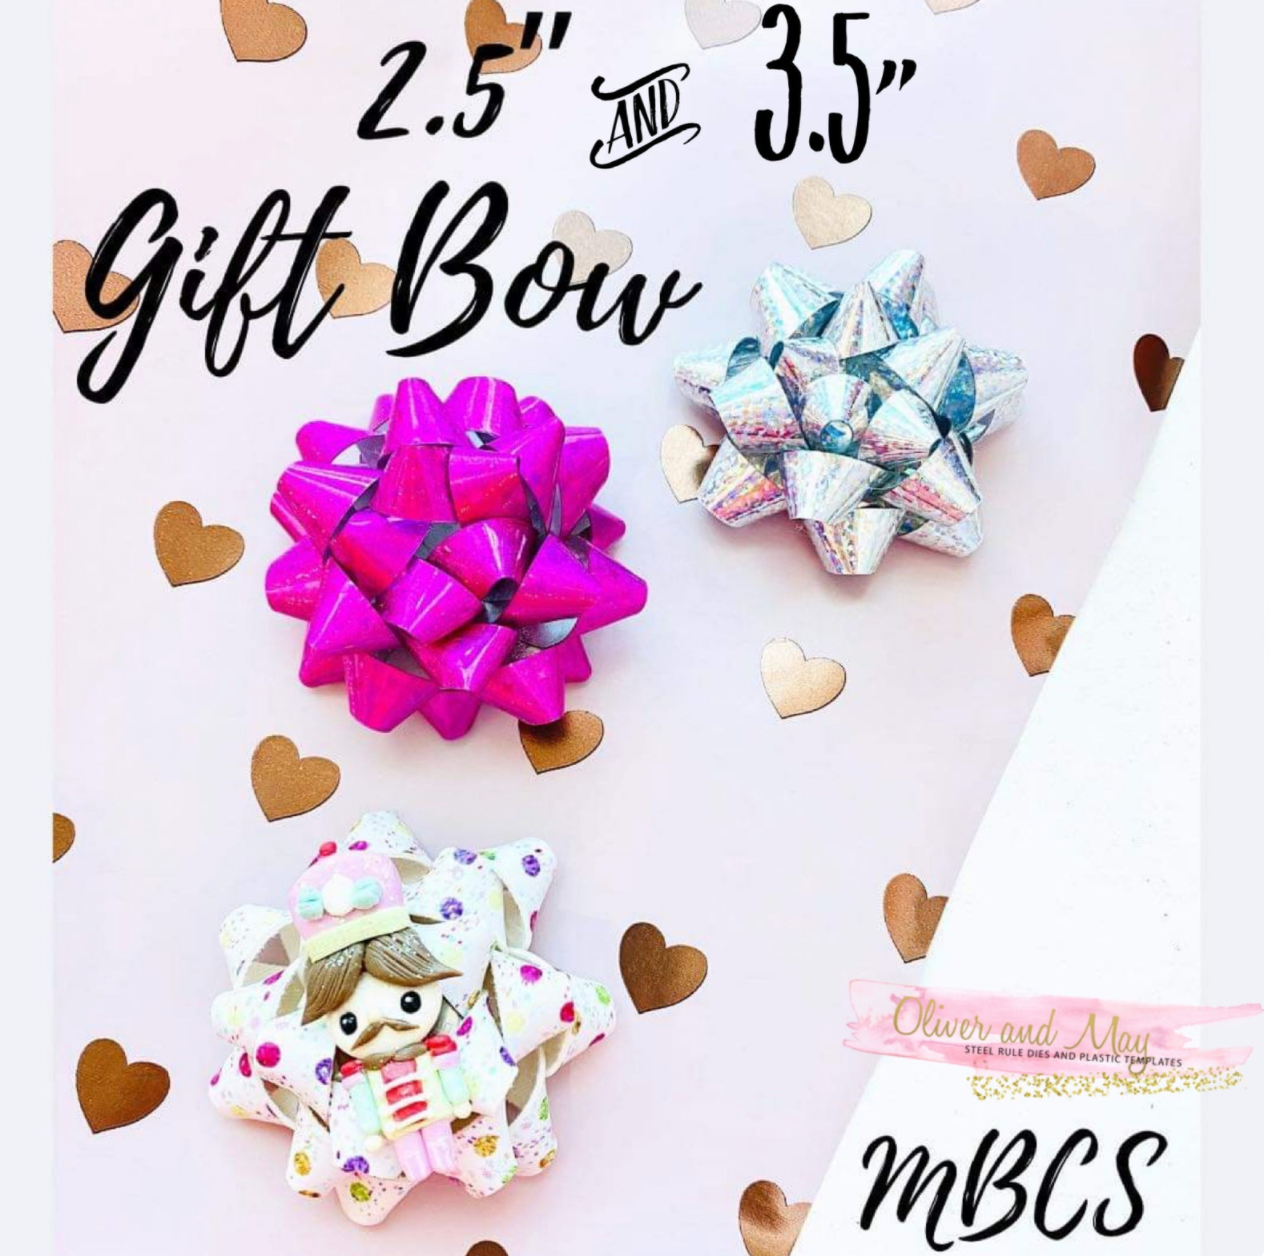 Gift Bow Steel Rule Die in choice of 2 sizes - 2.5" Gift Bow OR 3.5" Gift Bow